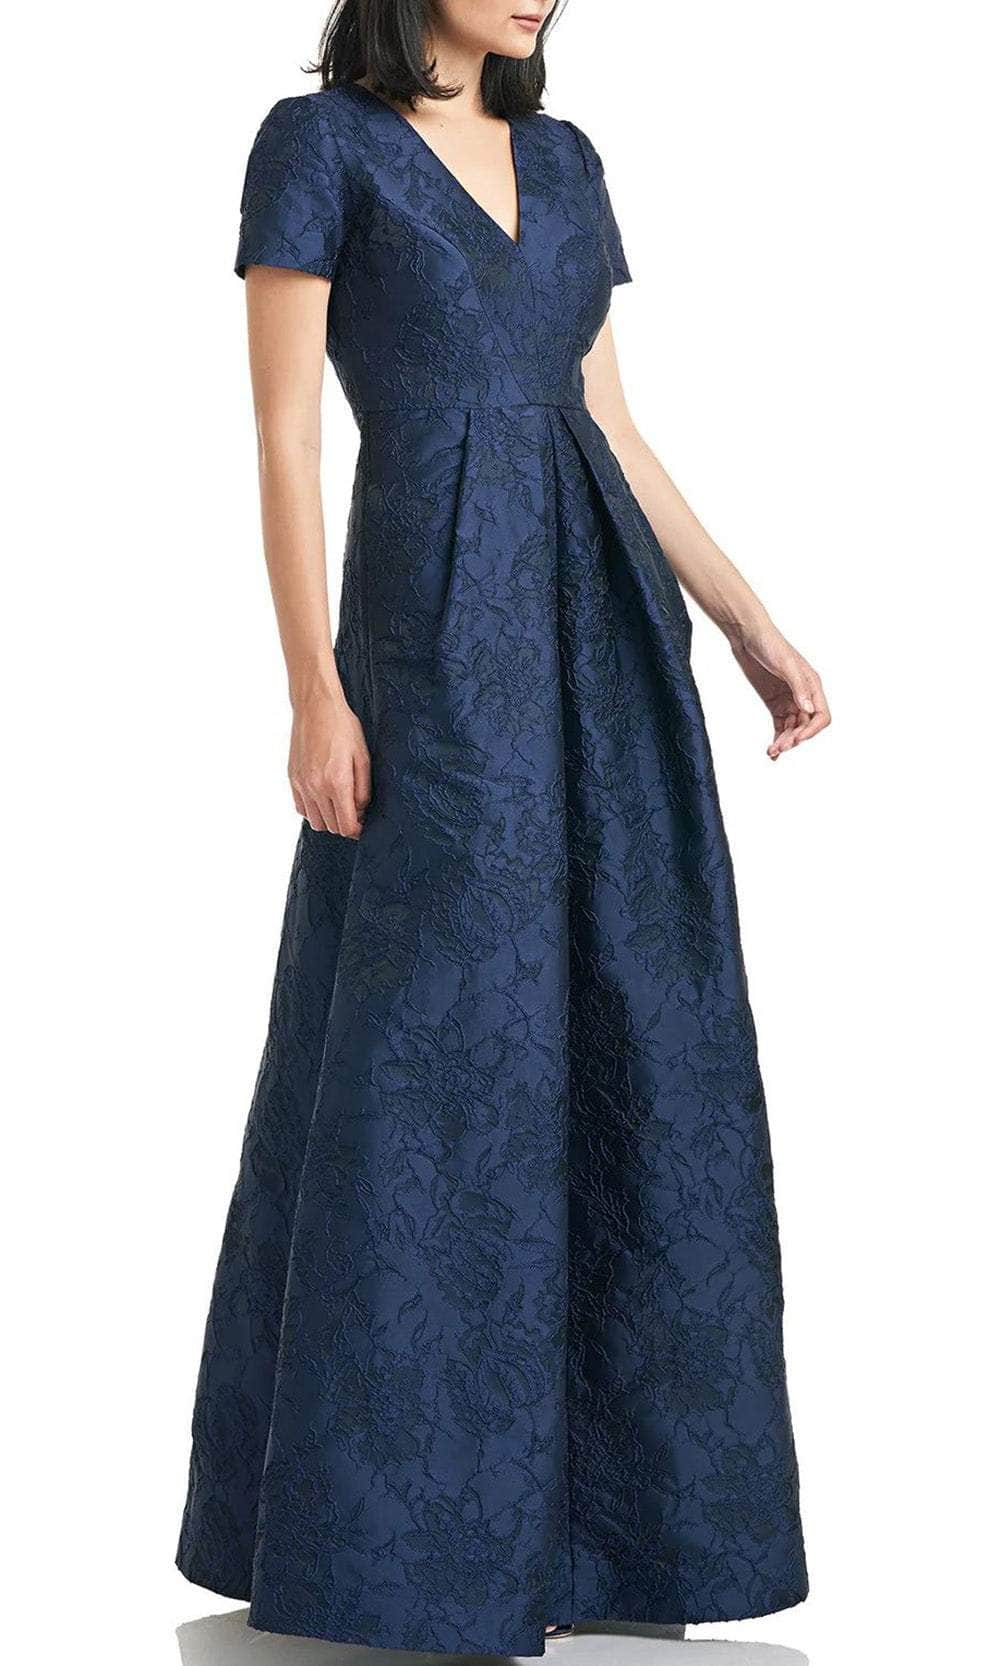 Kay Unger 5516713 - V Neck Jacquard A-Line Gown Special Occasion Dress